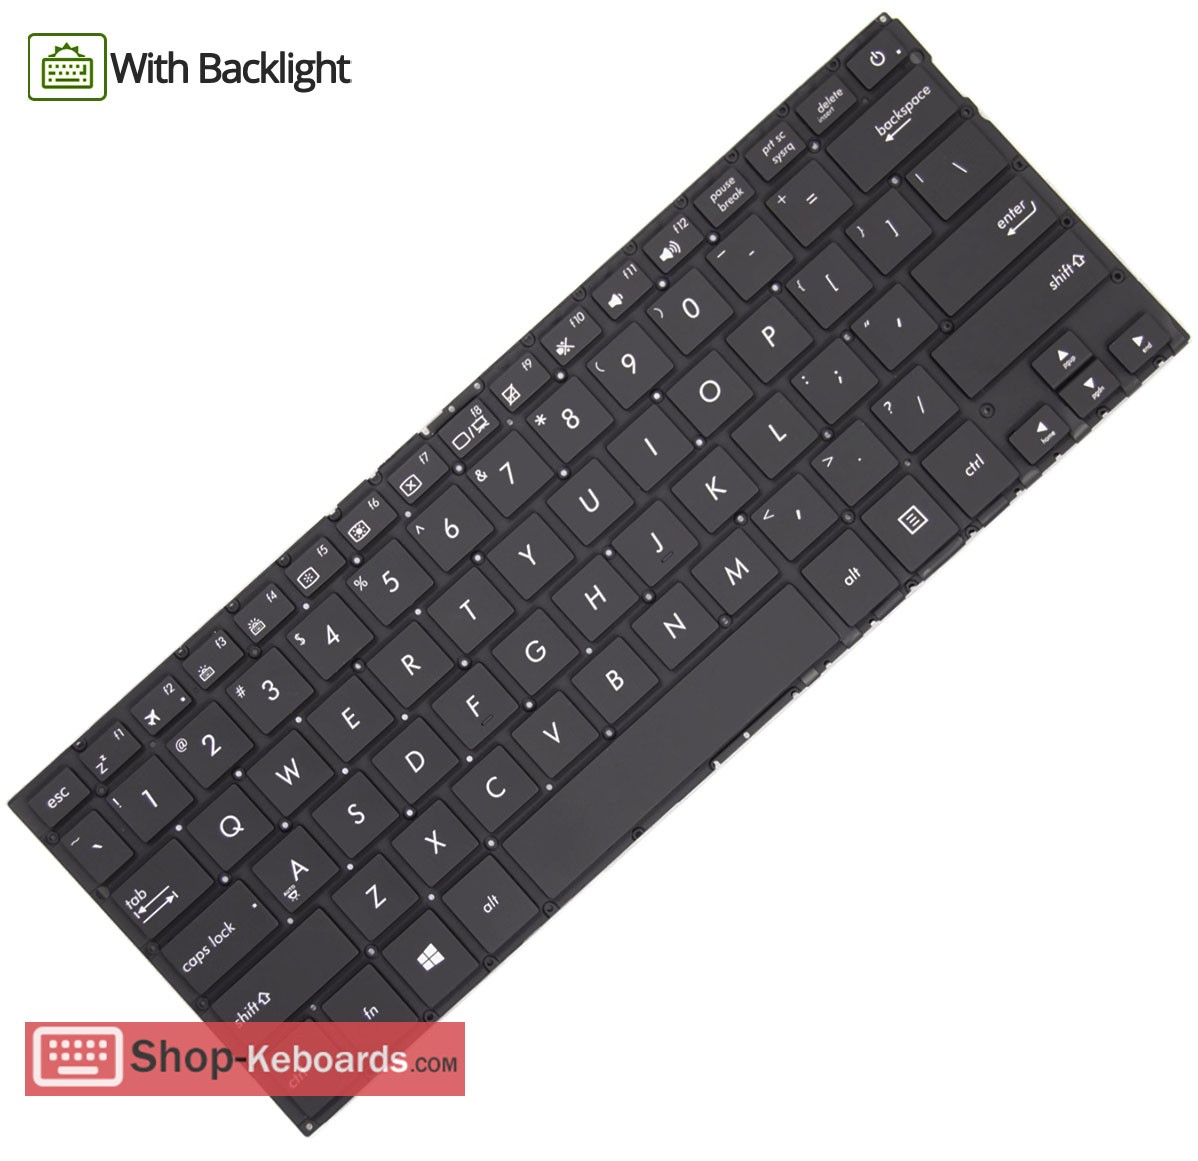 Asus 0KNB0-2627ND00 Keyboard replacement